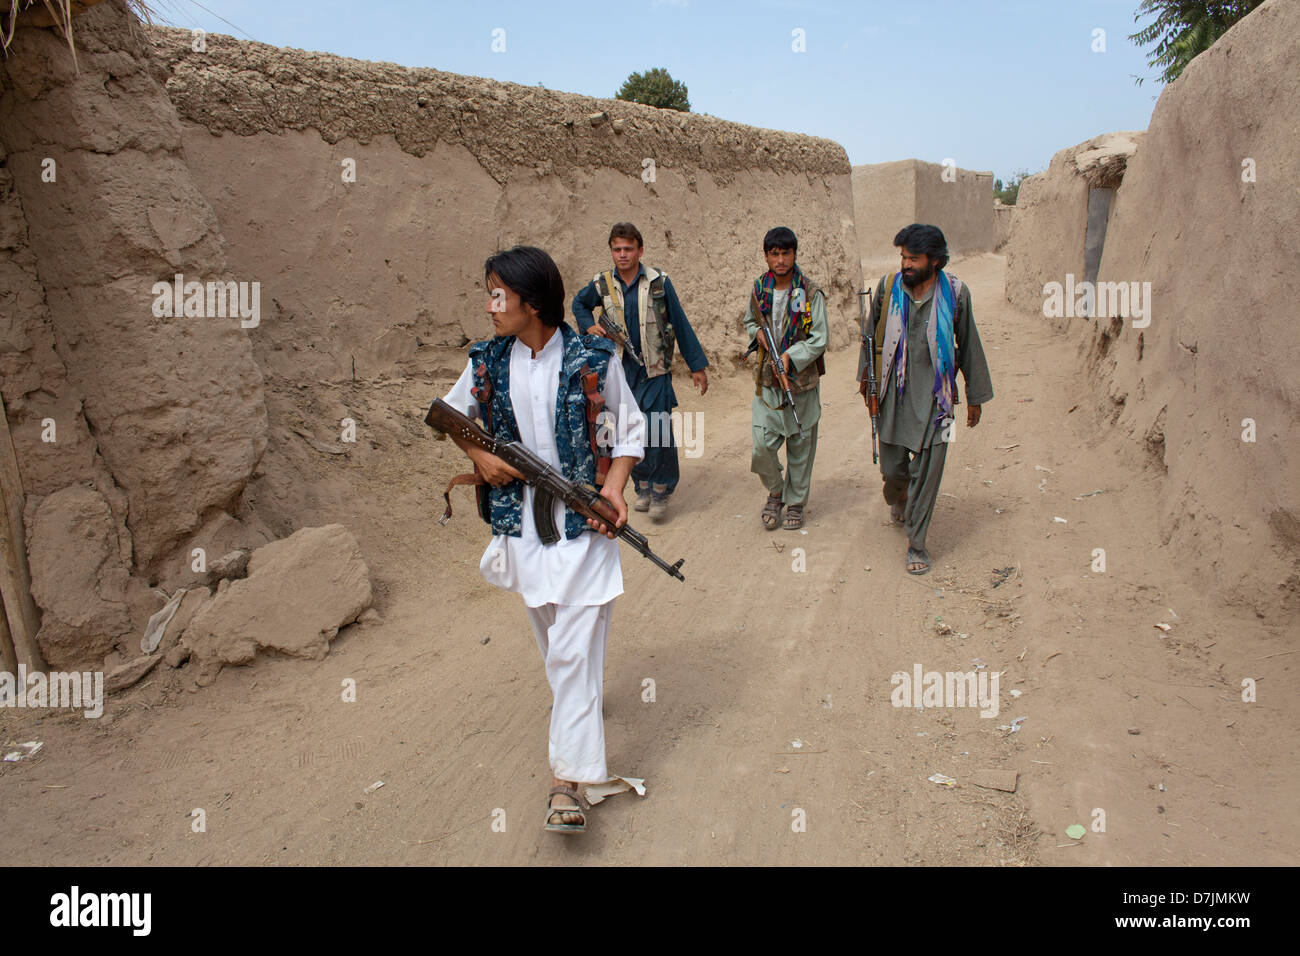 Warlords in Afghanistan Stockfoto